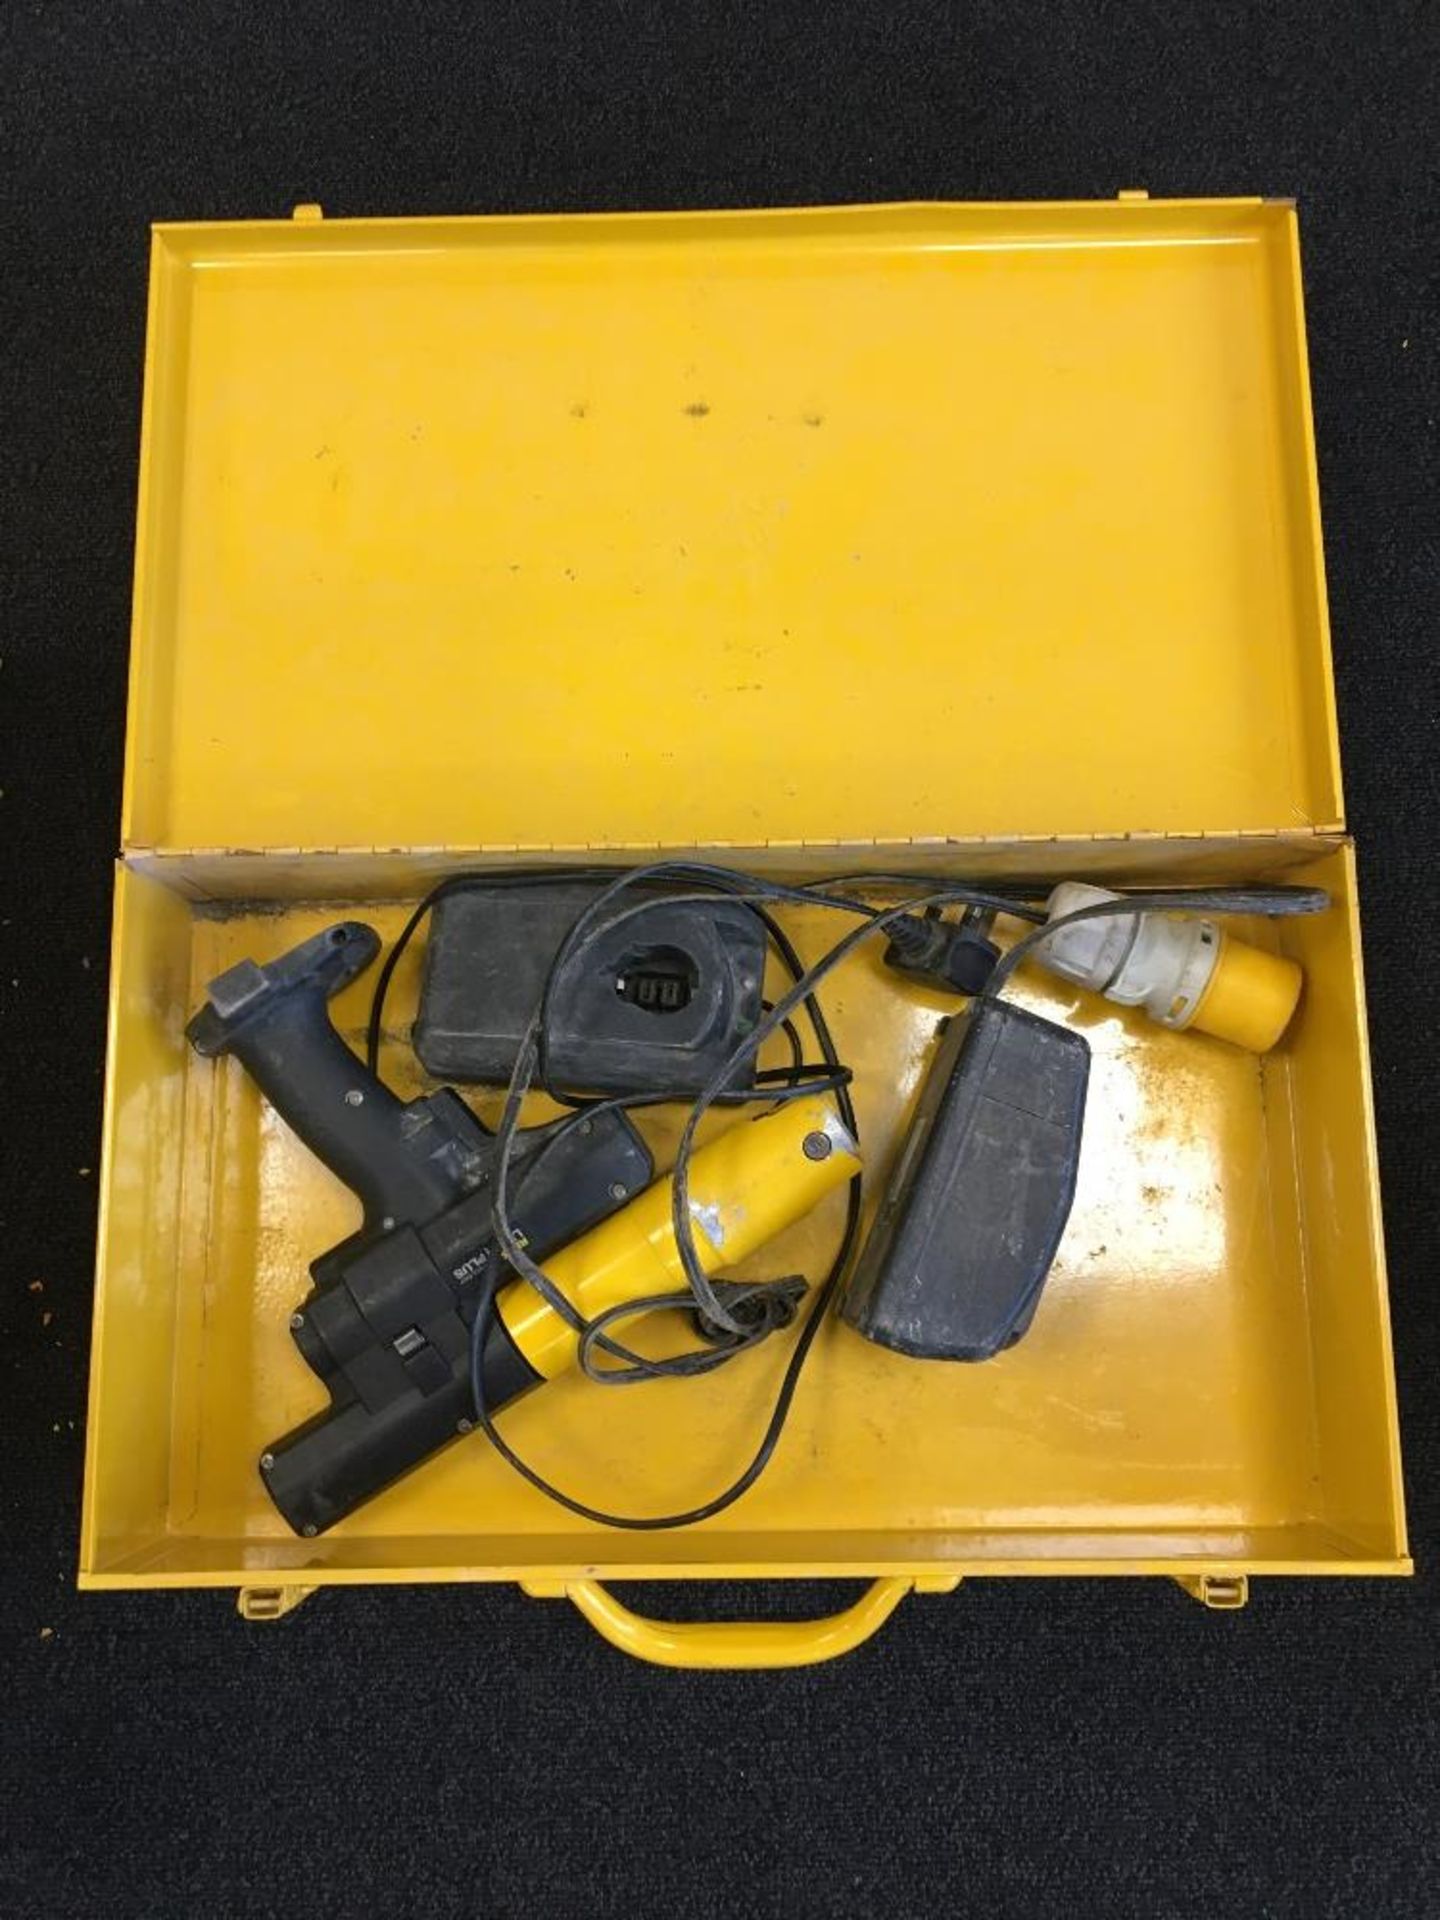 REMS Mini-press 578289 Gun & Charger with carry case - Image 2 of 3